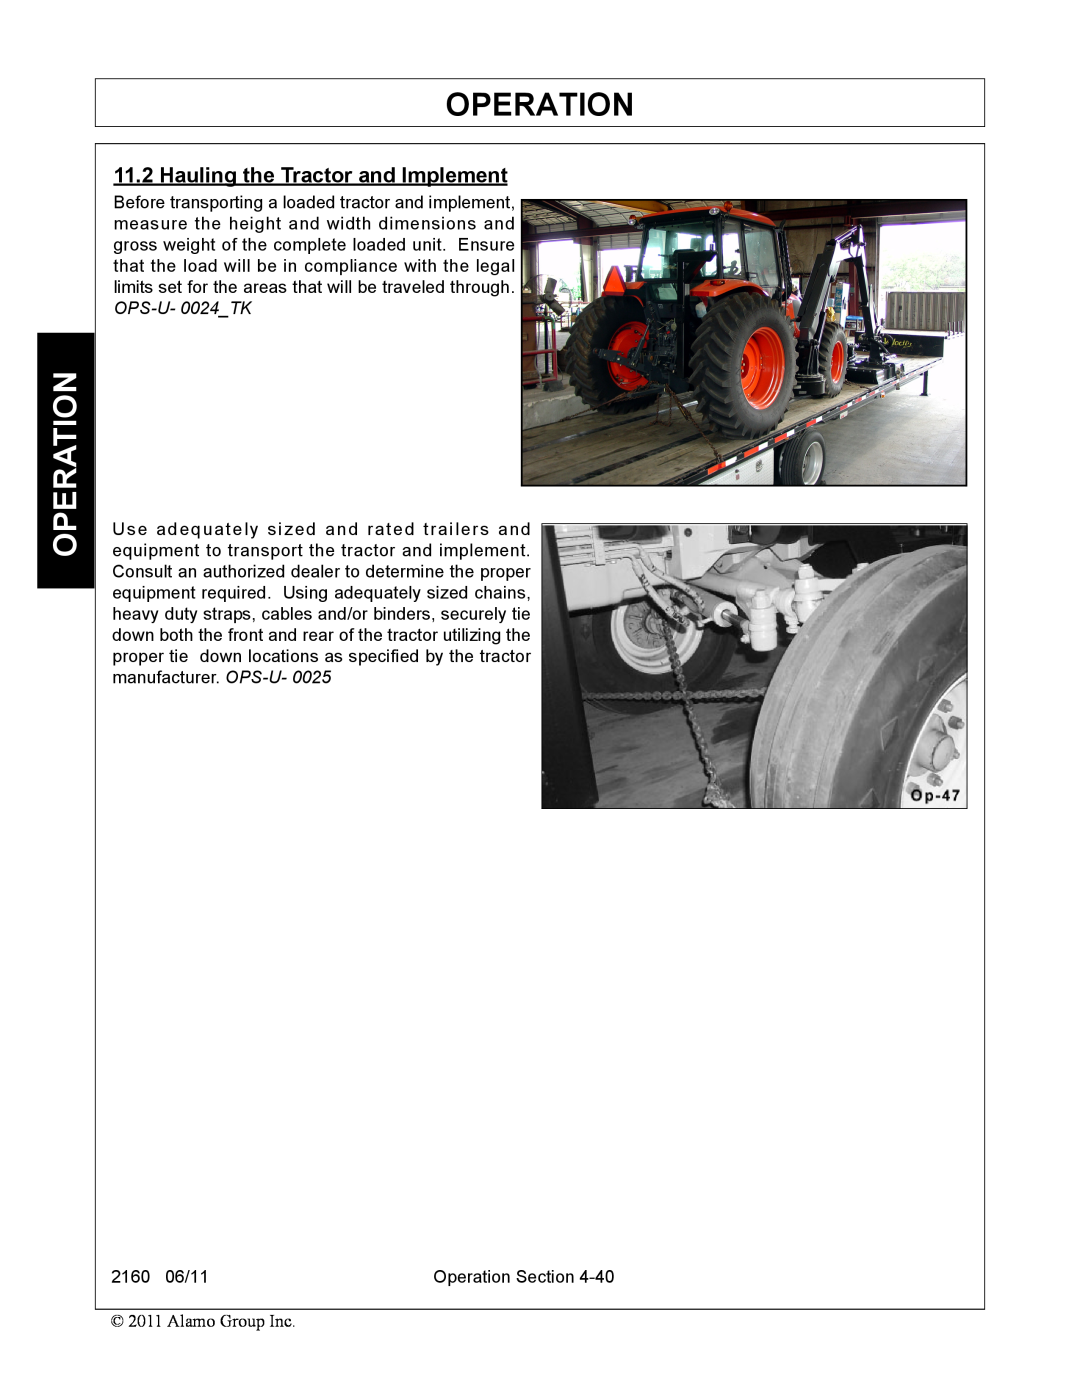 Servis-Rhino 2160 manual Operation, Hauling the Tractor and Implement 